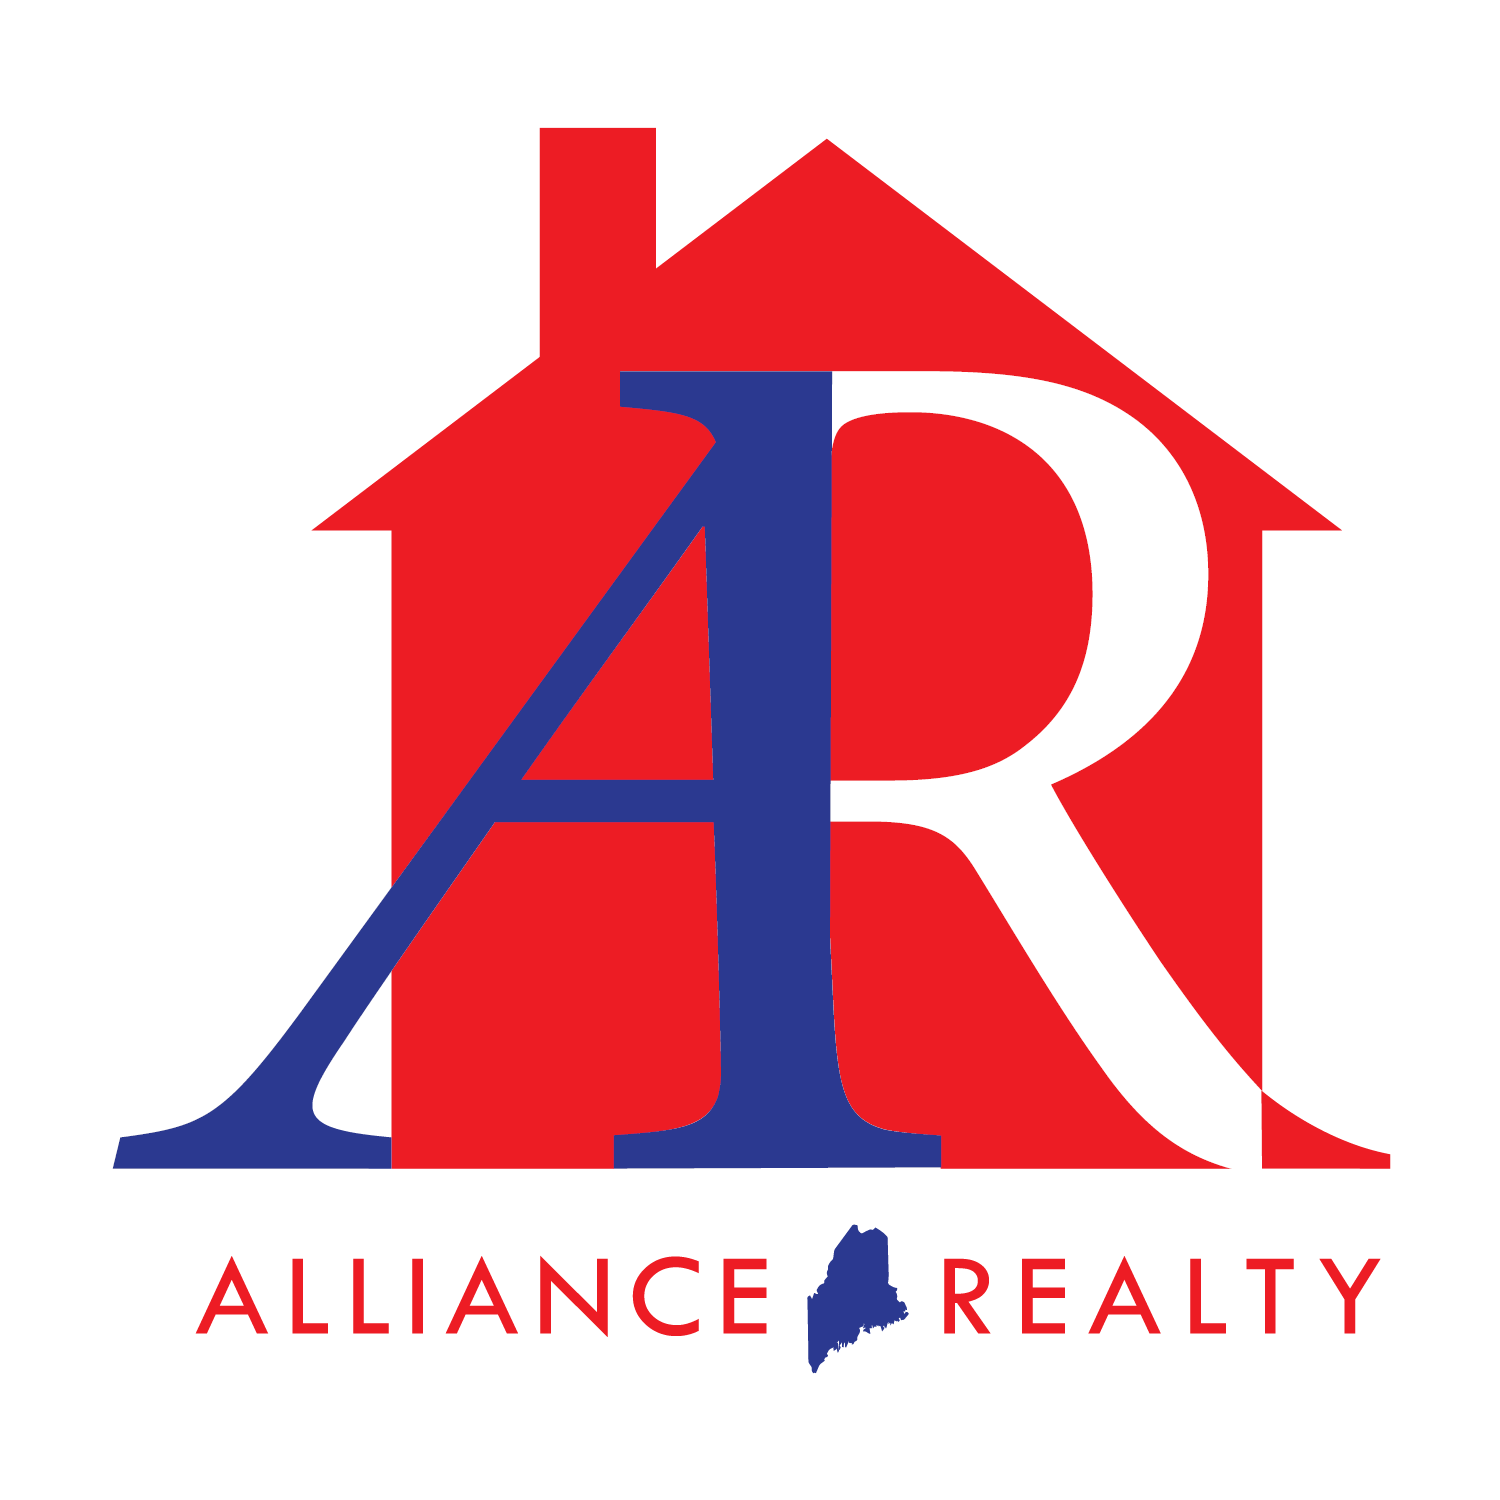 Meet John F. Chase, Owner of Alliance Realty